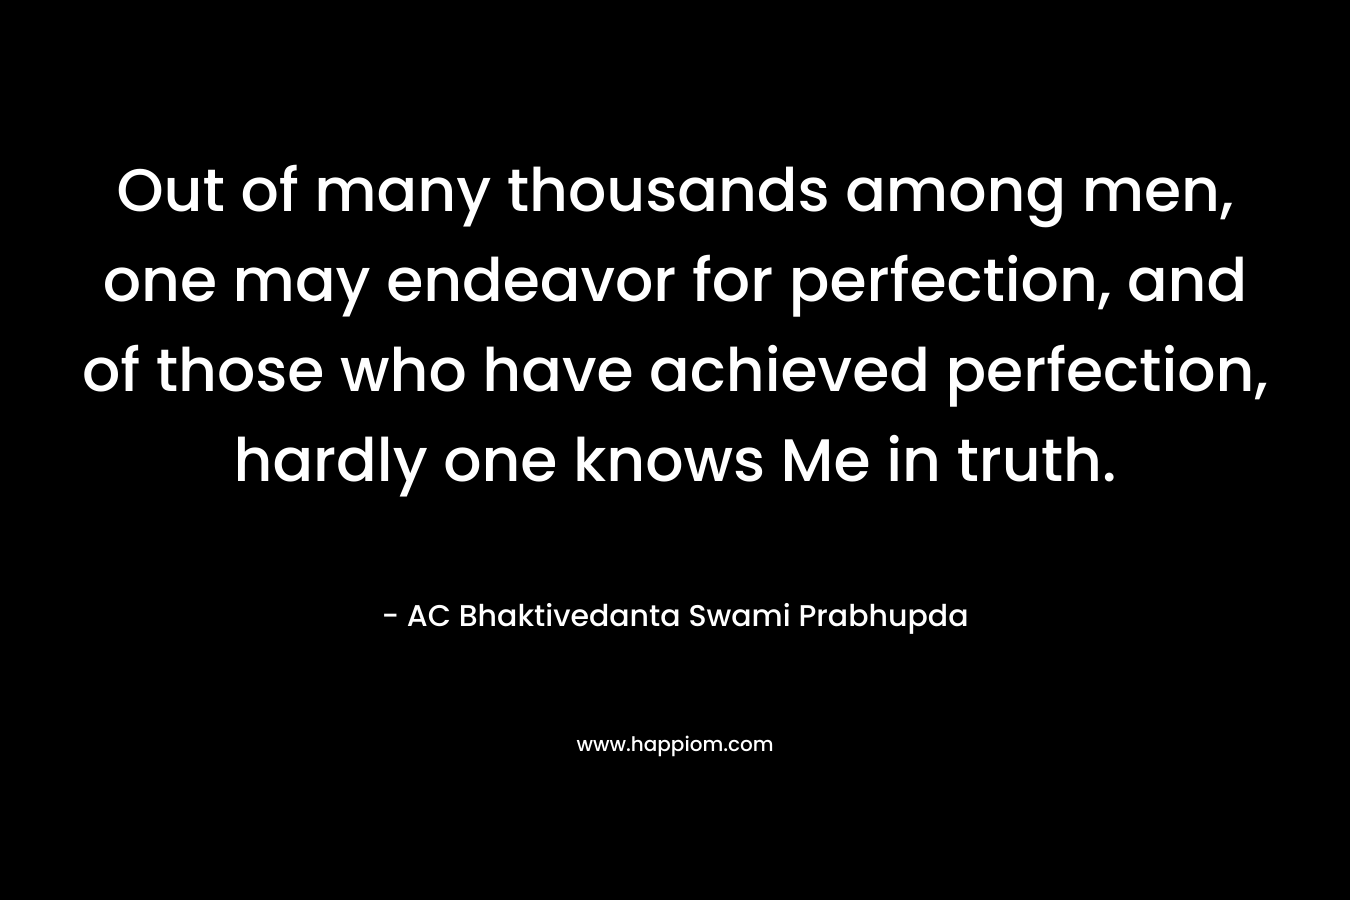 Out of many thousands among men, one may endeavor for perfection, and of those who have achieved perfection, hardly one knows Me in truth. – AC Bhaktivedanta Swami Prabhupda